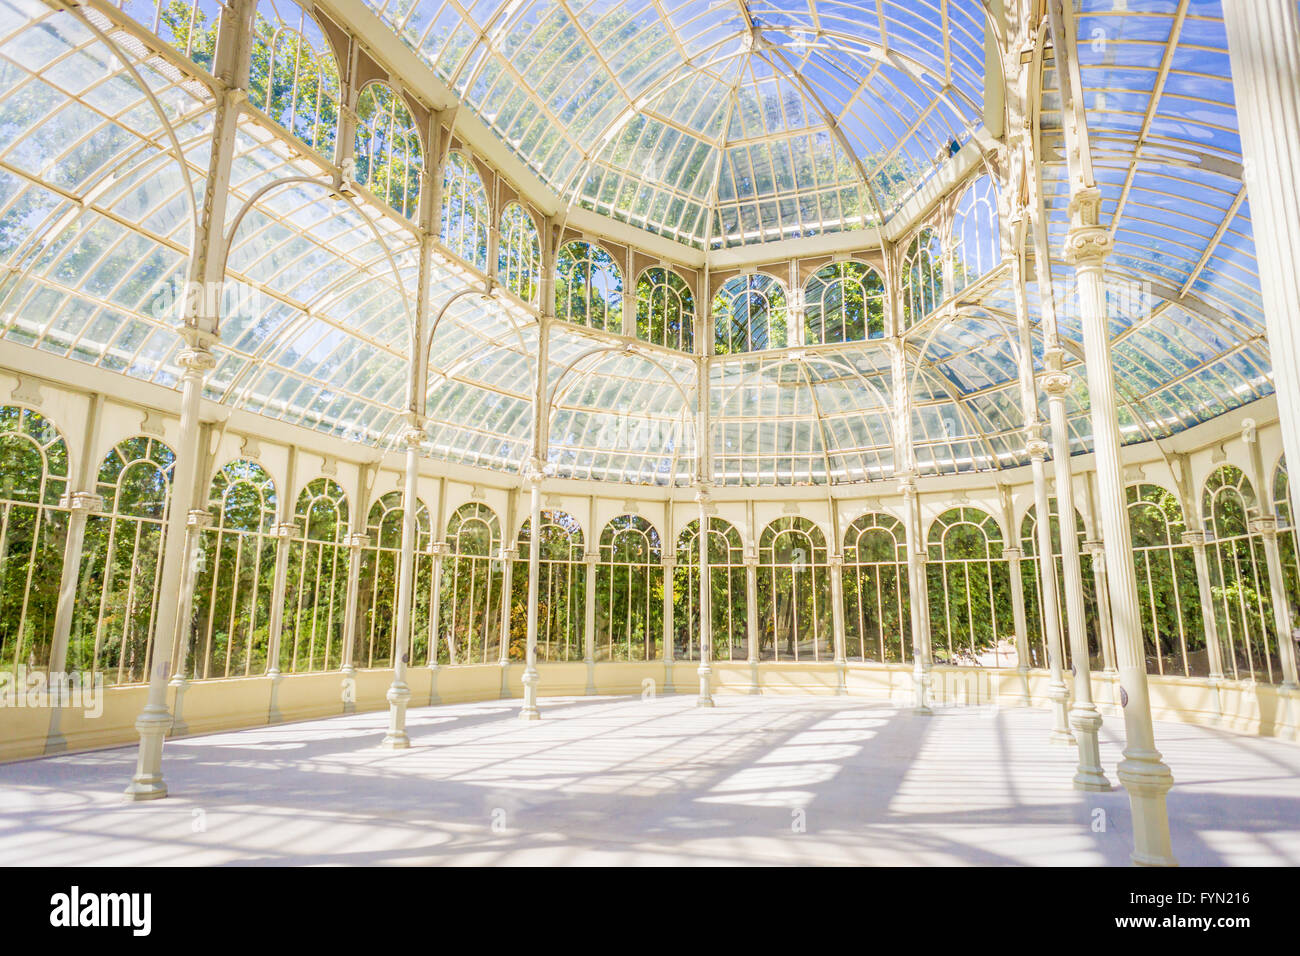 The Crystal Palace (Palacio de Cristal) is located inside the Retiro park in Madrid, Spain. It is a metal structure used for exp Stock Photo